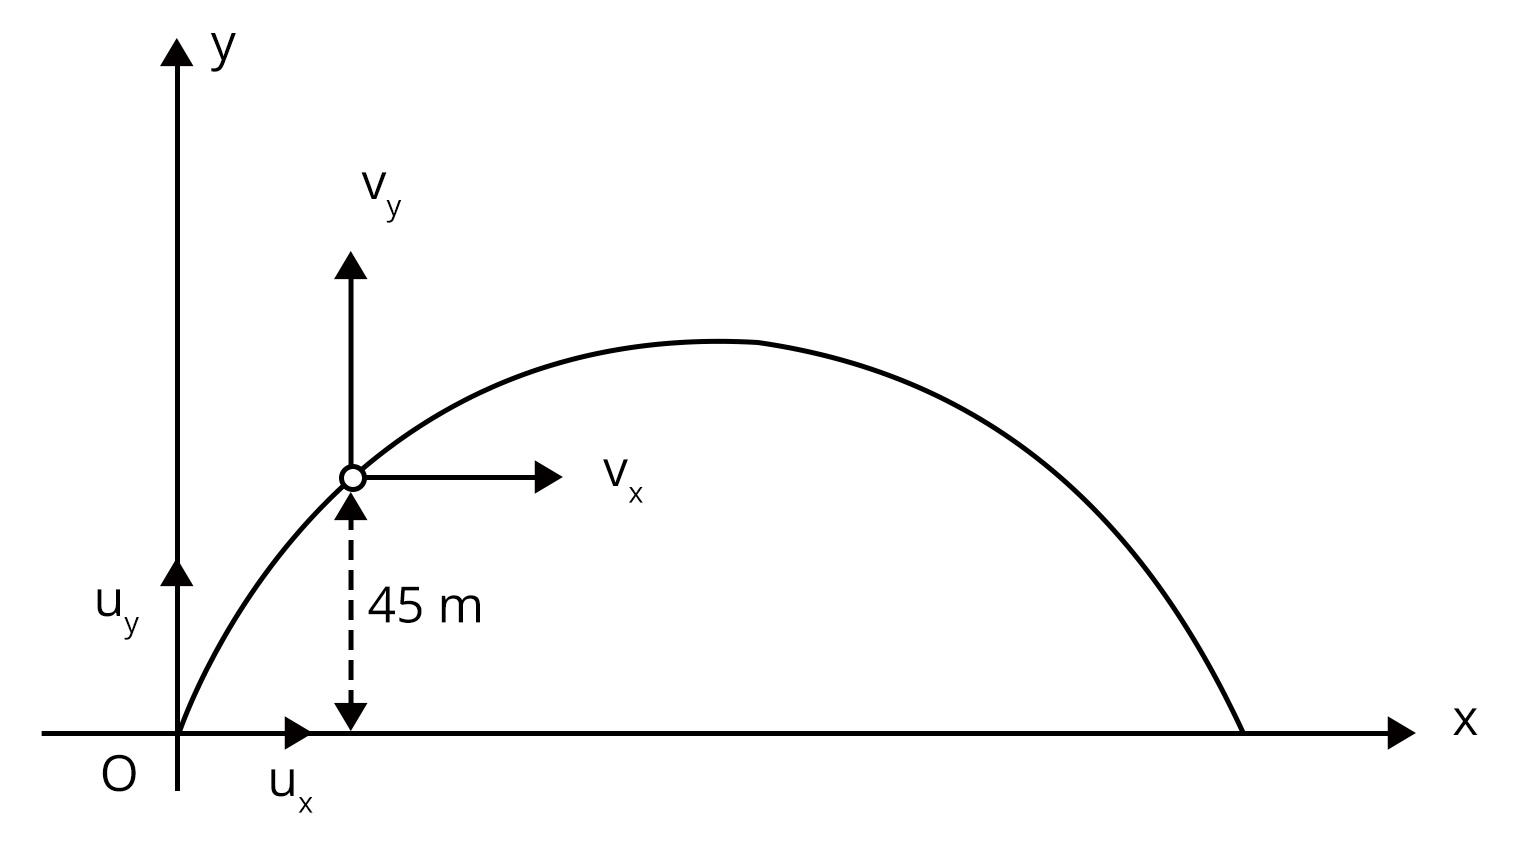 Initial velocity of the projectile